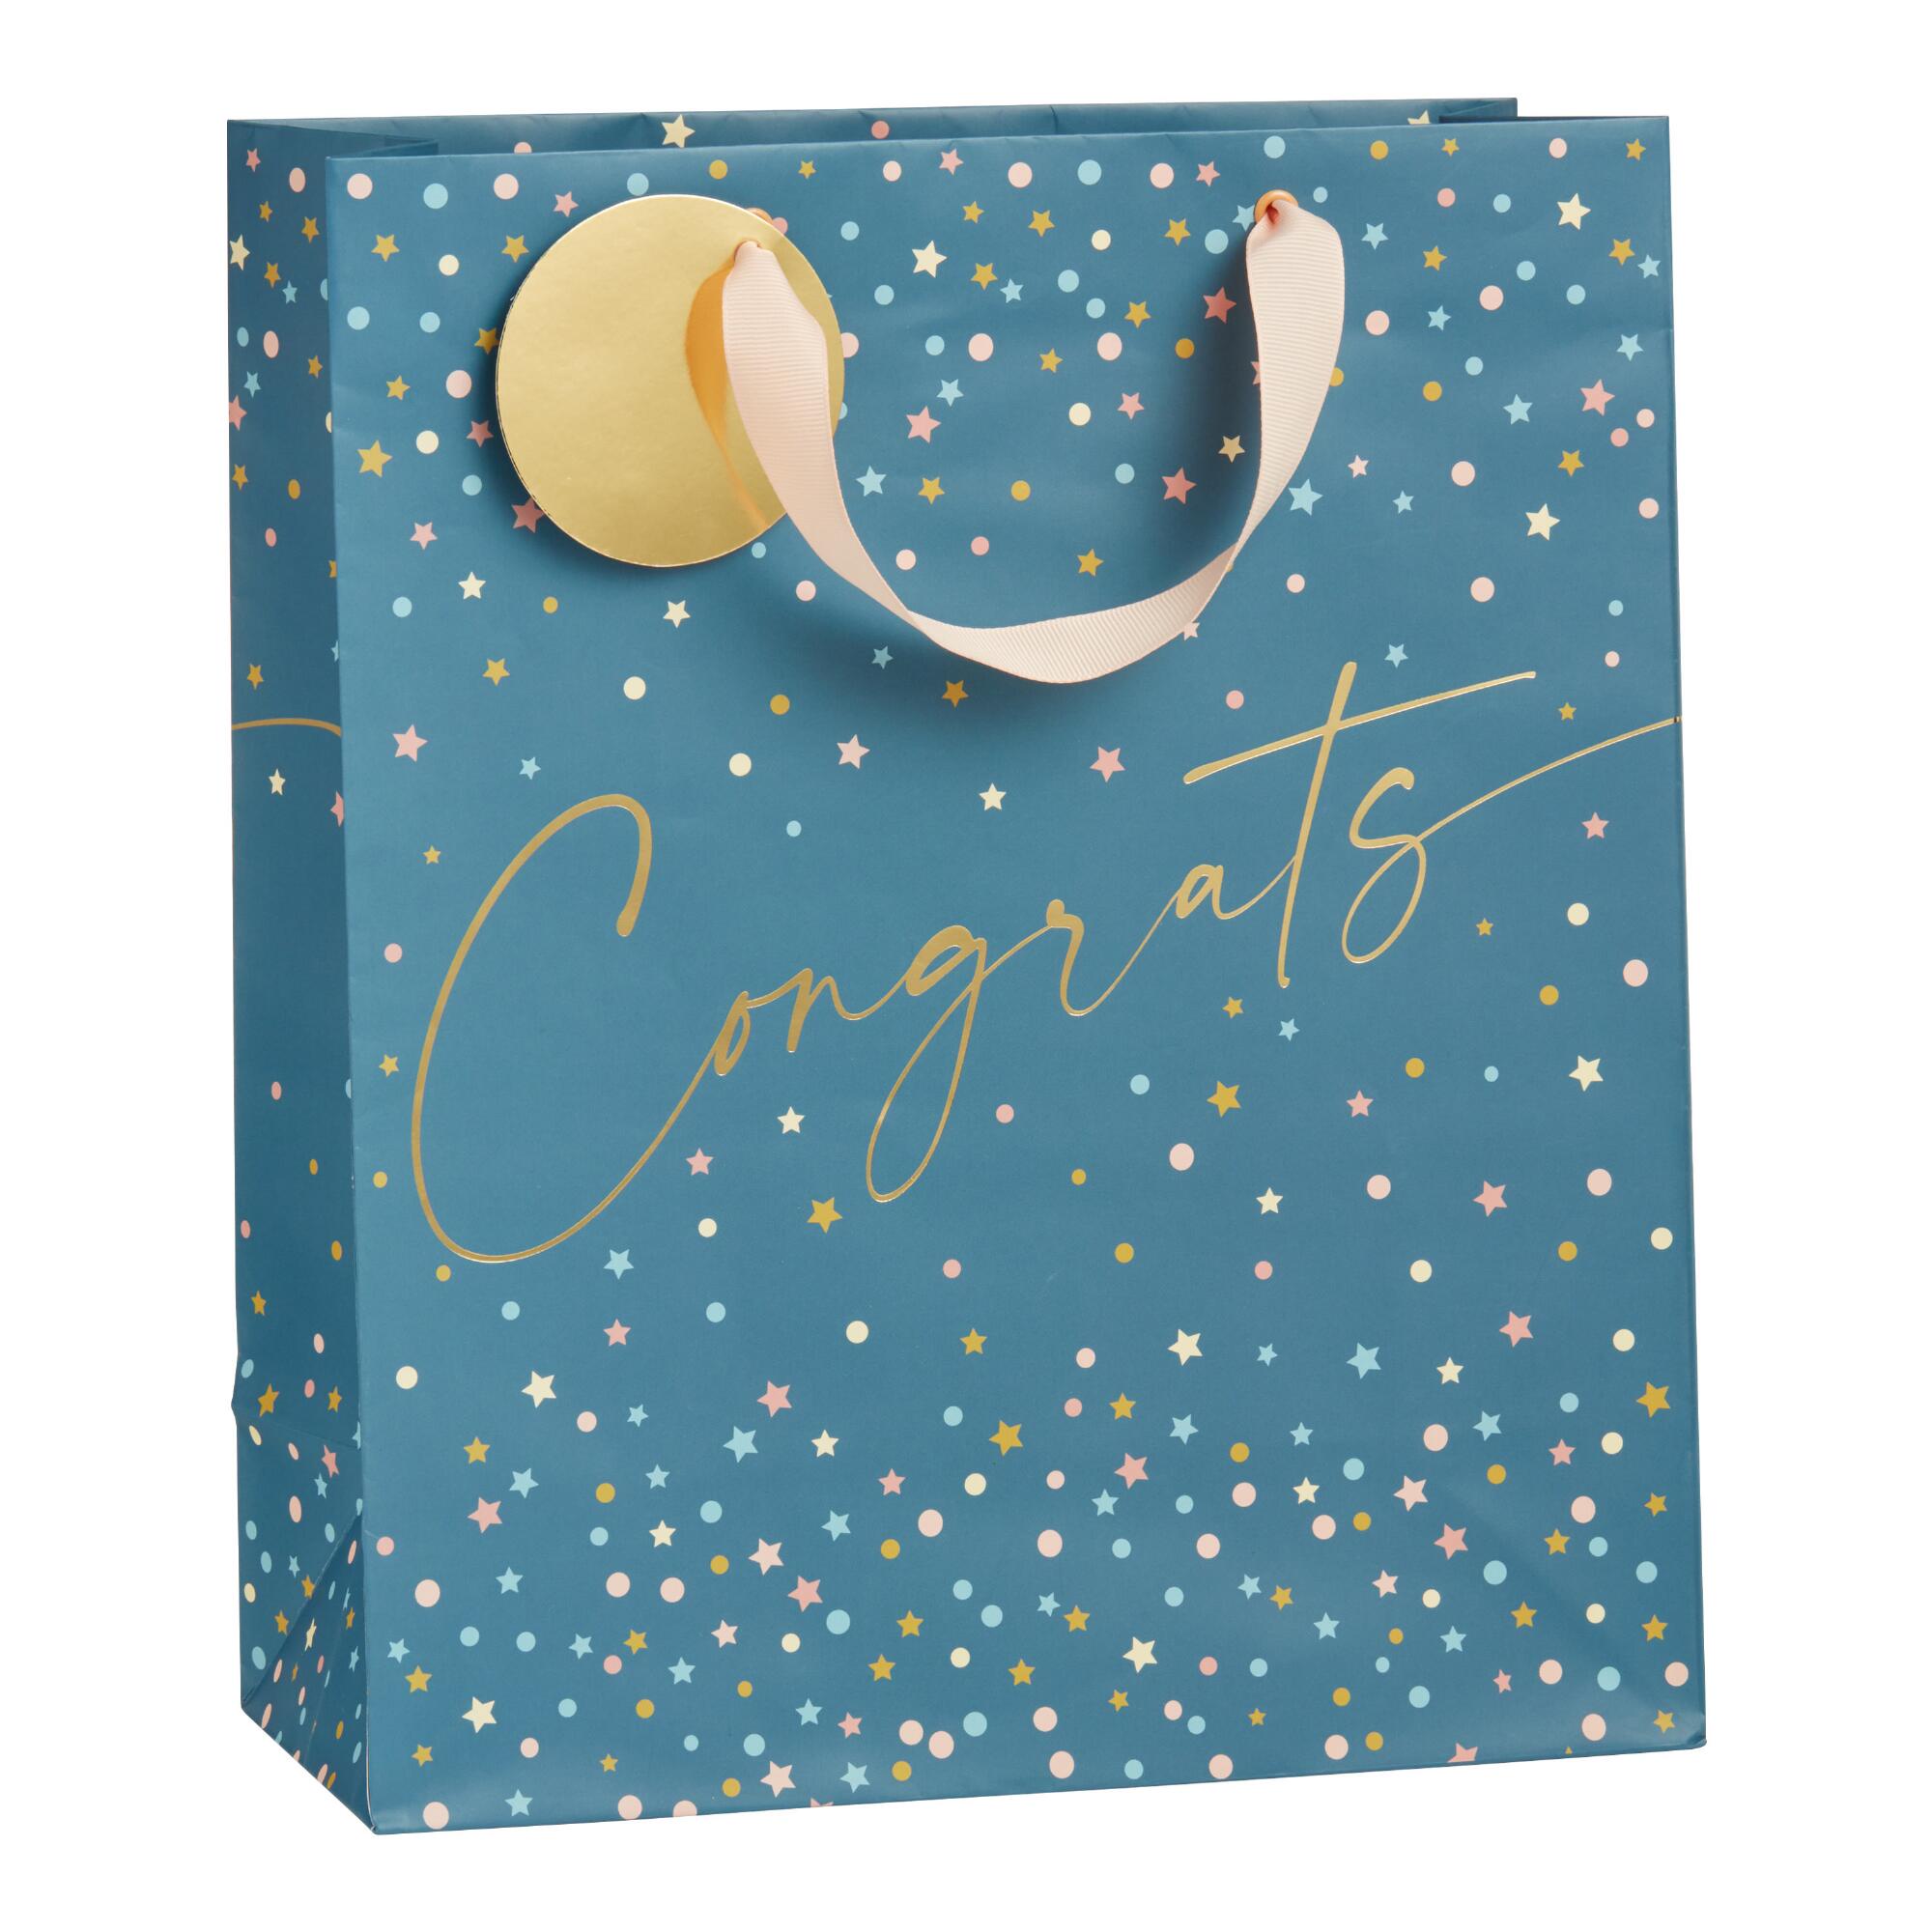 Large Navy Confetti Congrats Gift Bag Set Of 2 by World Market